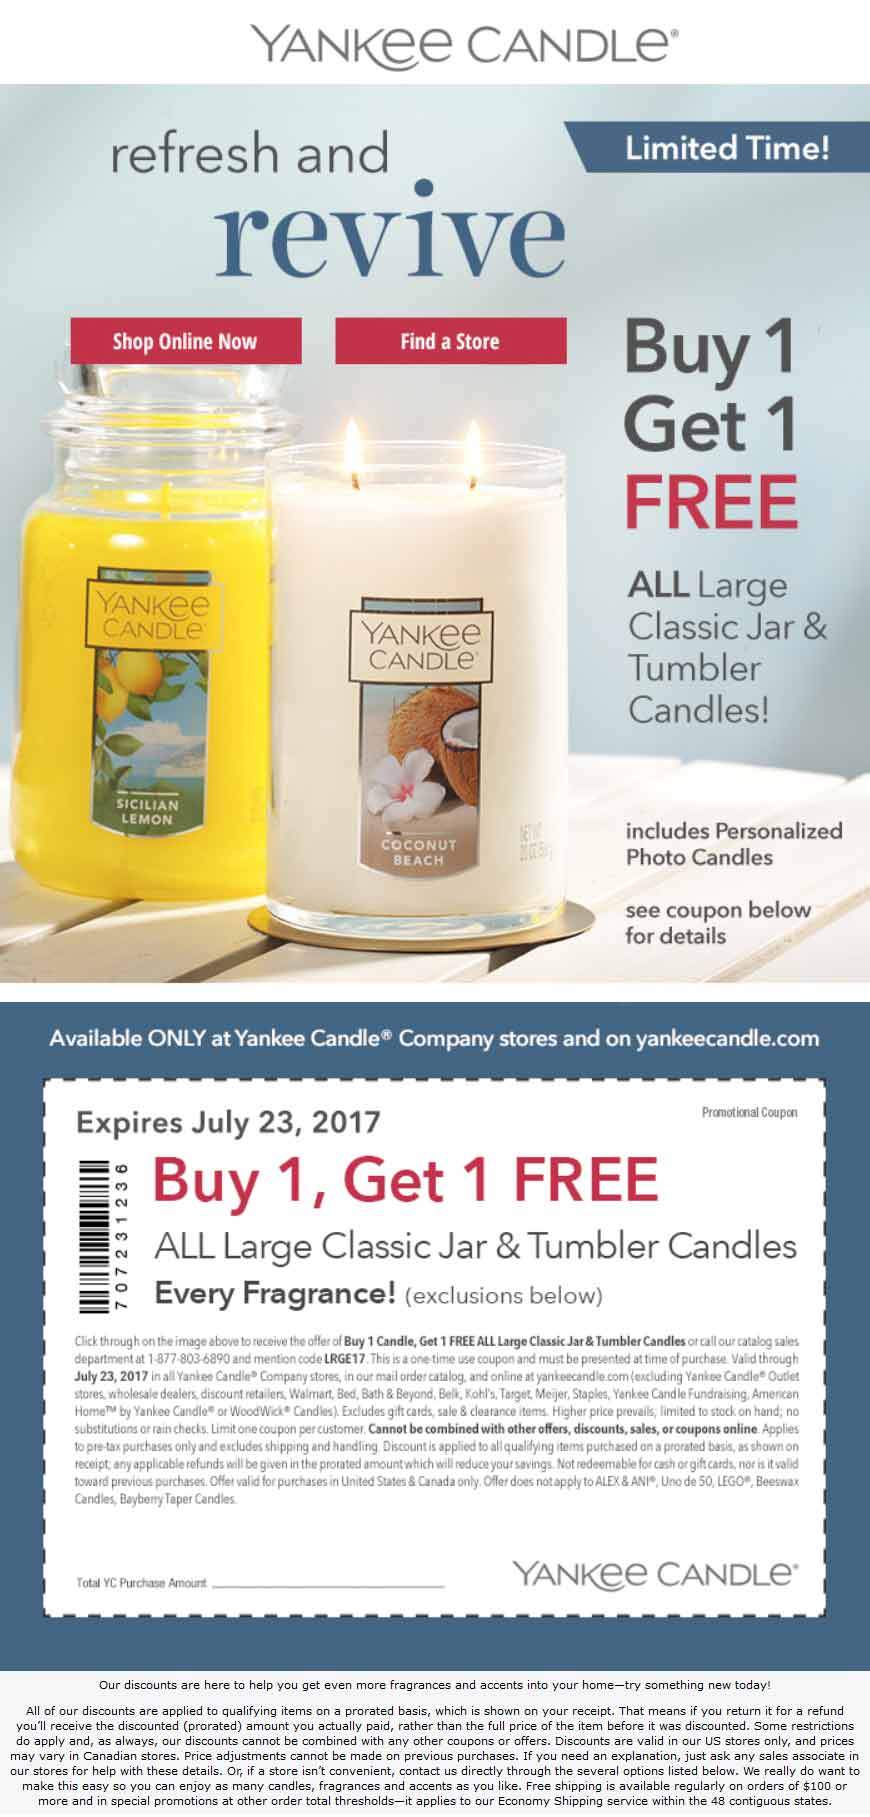 Yankee Candle Coupon April 2024 Second large candle free at Yankee Candle, or online via promo code LRGE17